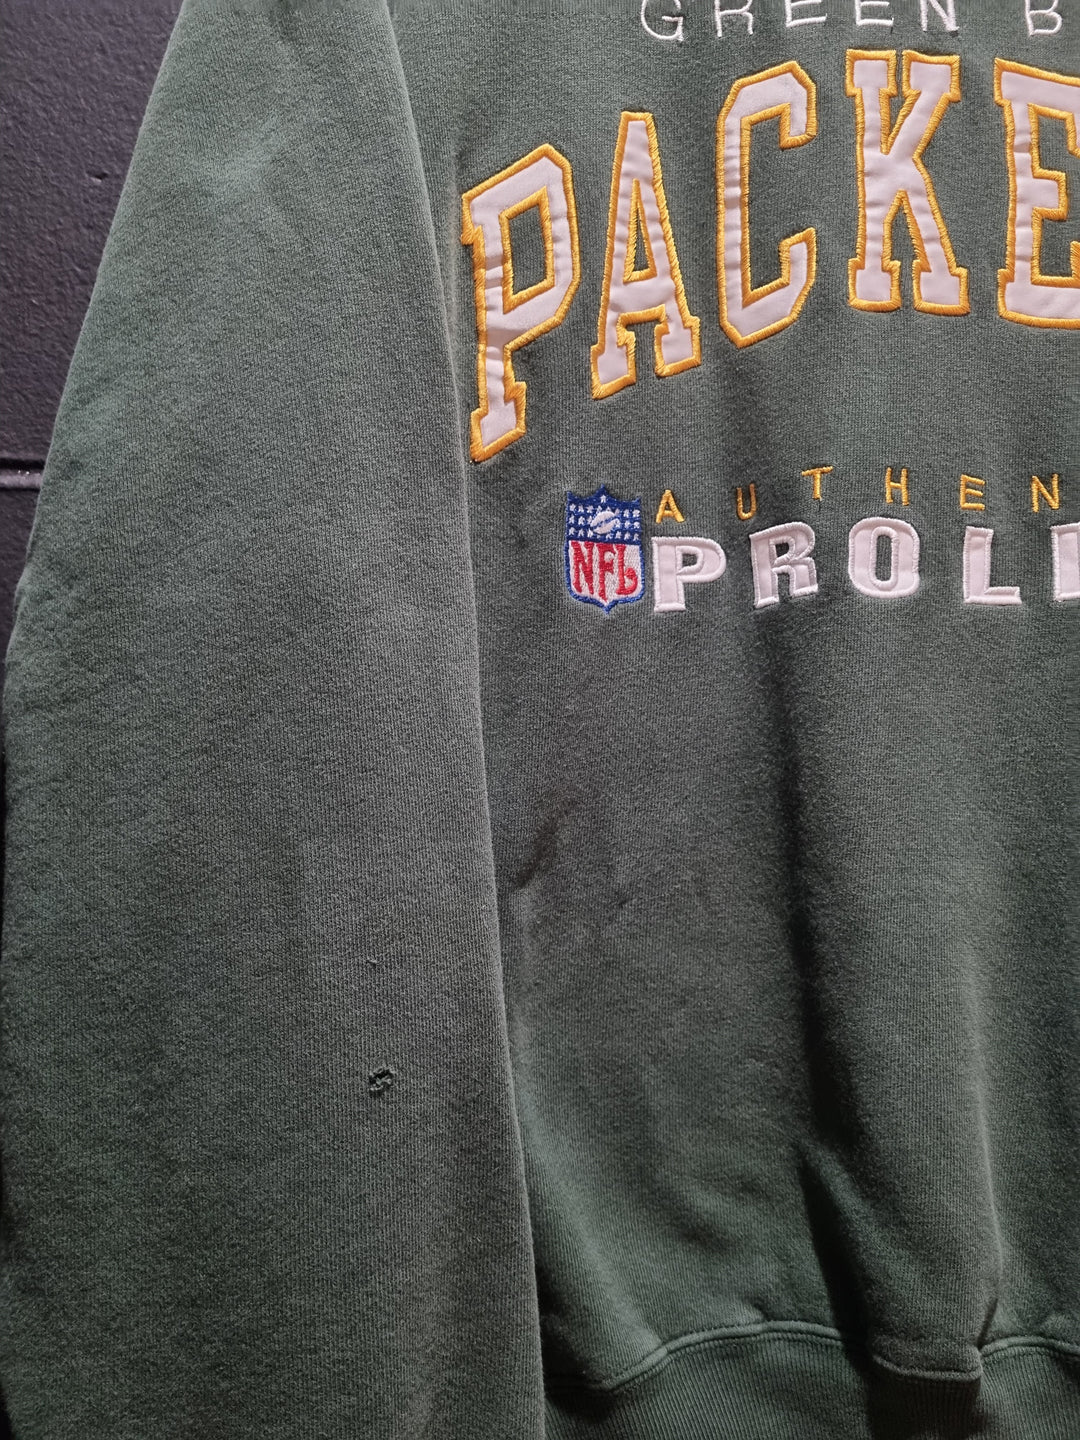 Green Bay Packers Authentic Proline 1996 XL